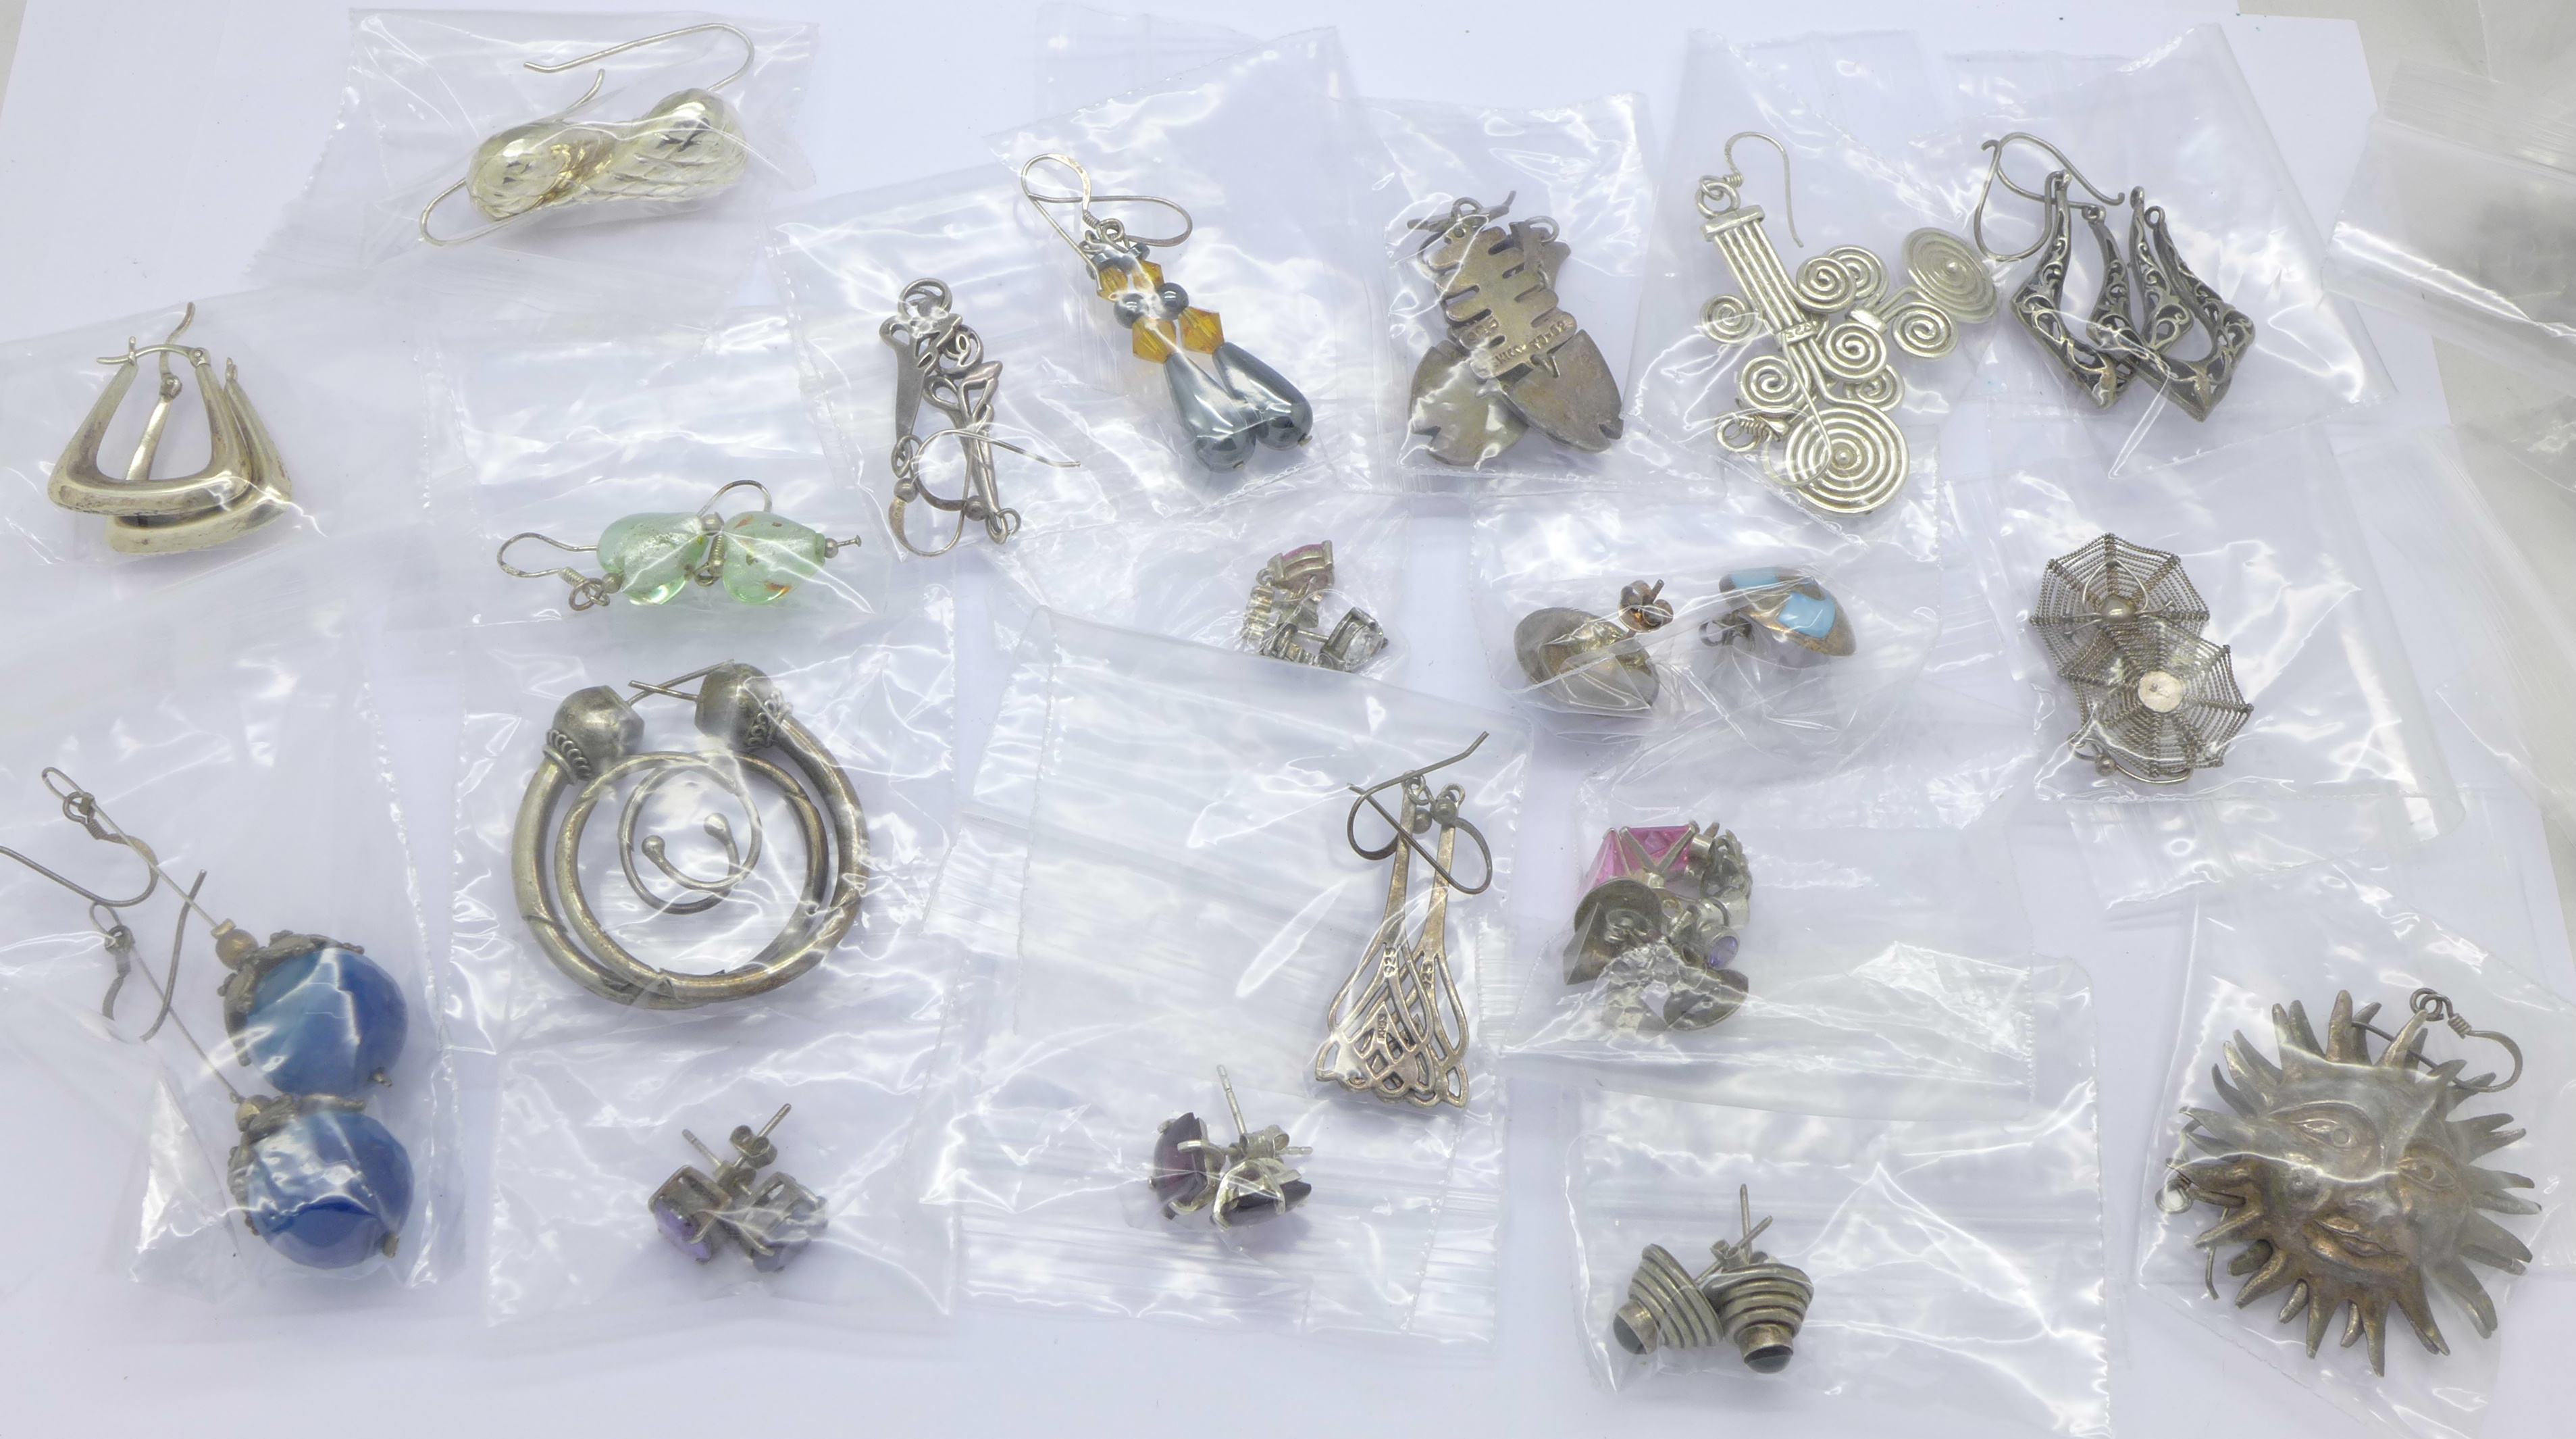 Thirty pairs of silver earrings